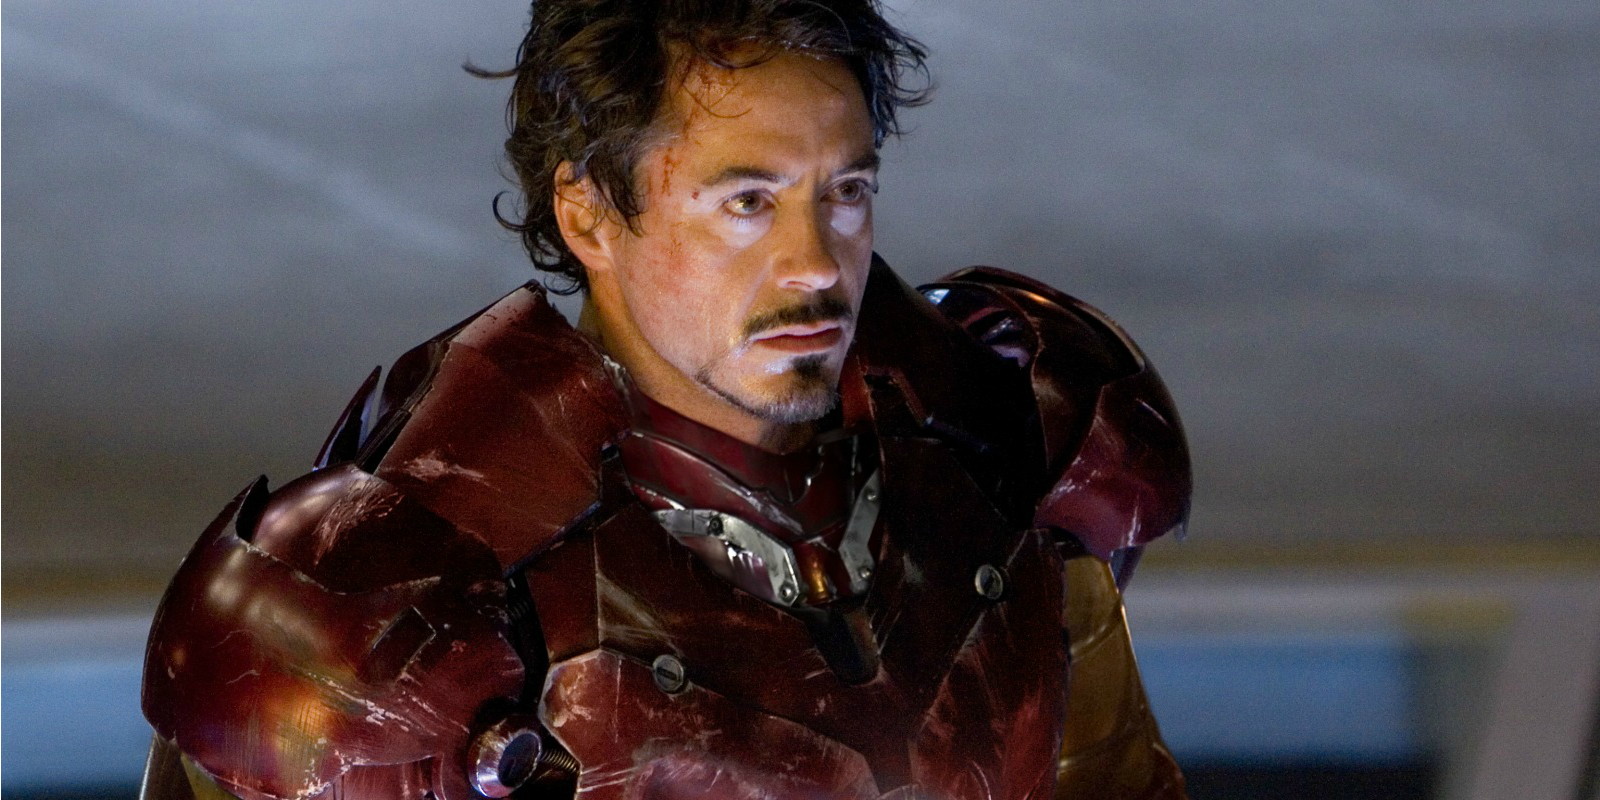 Iron Man with his helmet off in Iron Man 3.